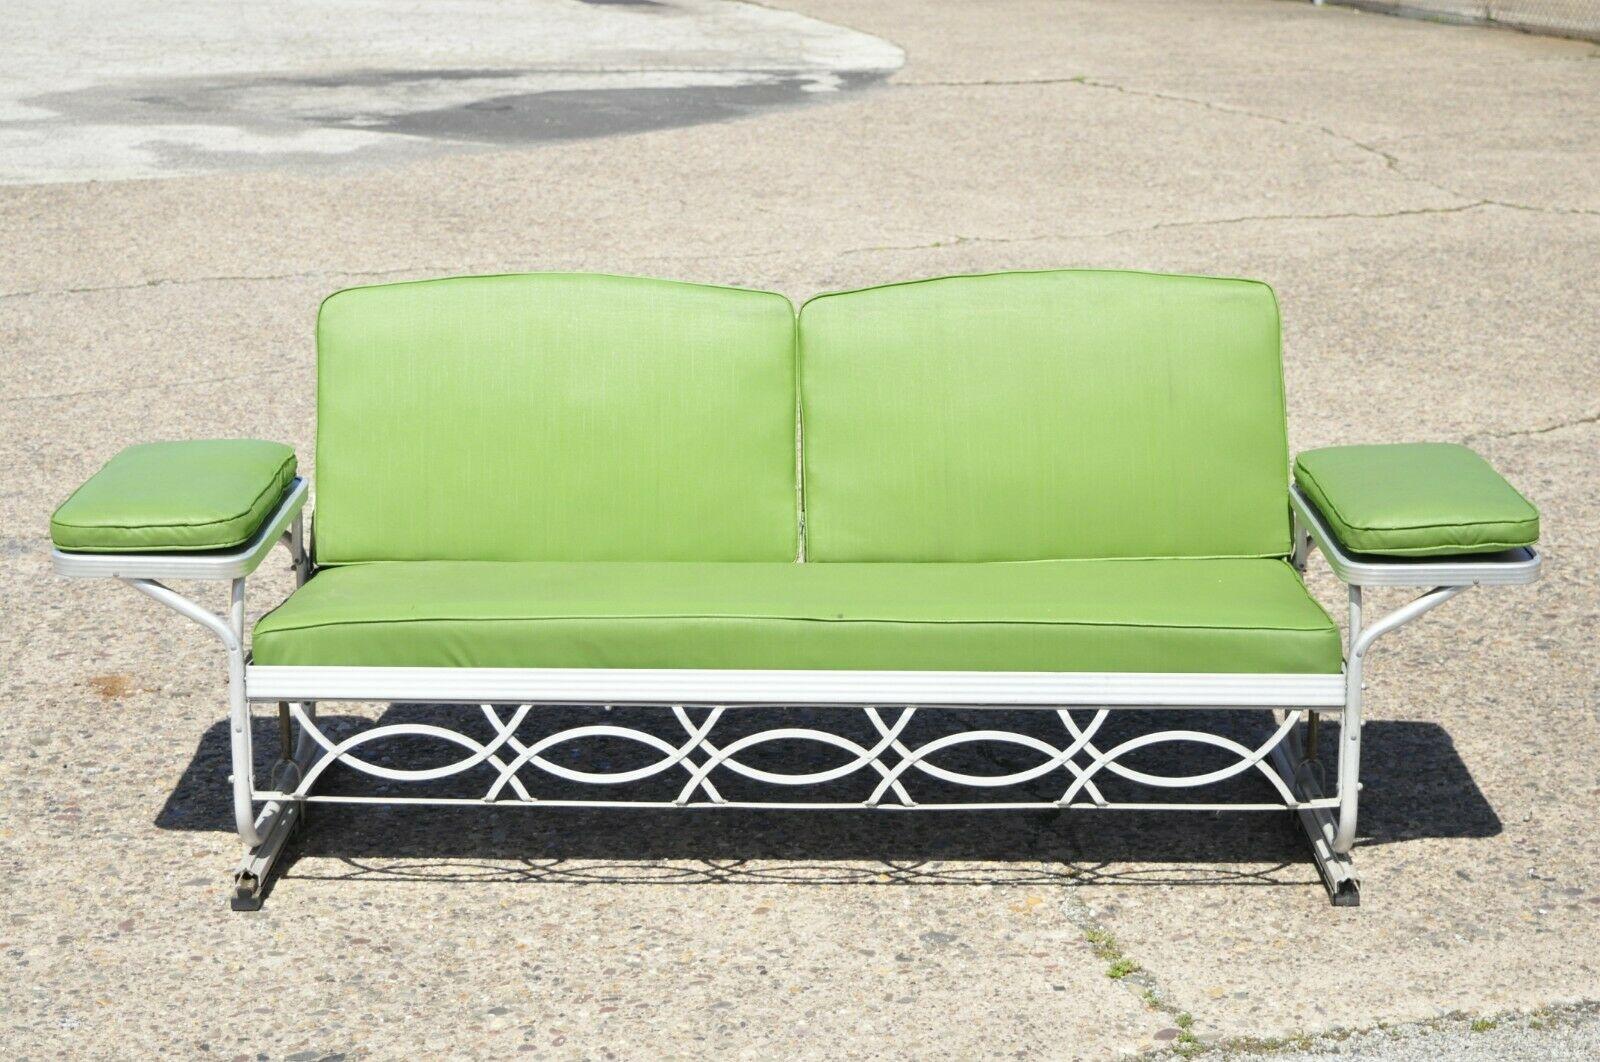 Vintage J.R. Bunting aluminum sleeper glider convertible sofa metal porch furniture. Item original reversible cushions, glider frame, aluminum construction, attached side tables, convertible frame from sofa to sleeper, very nice vintage item,